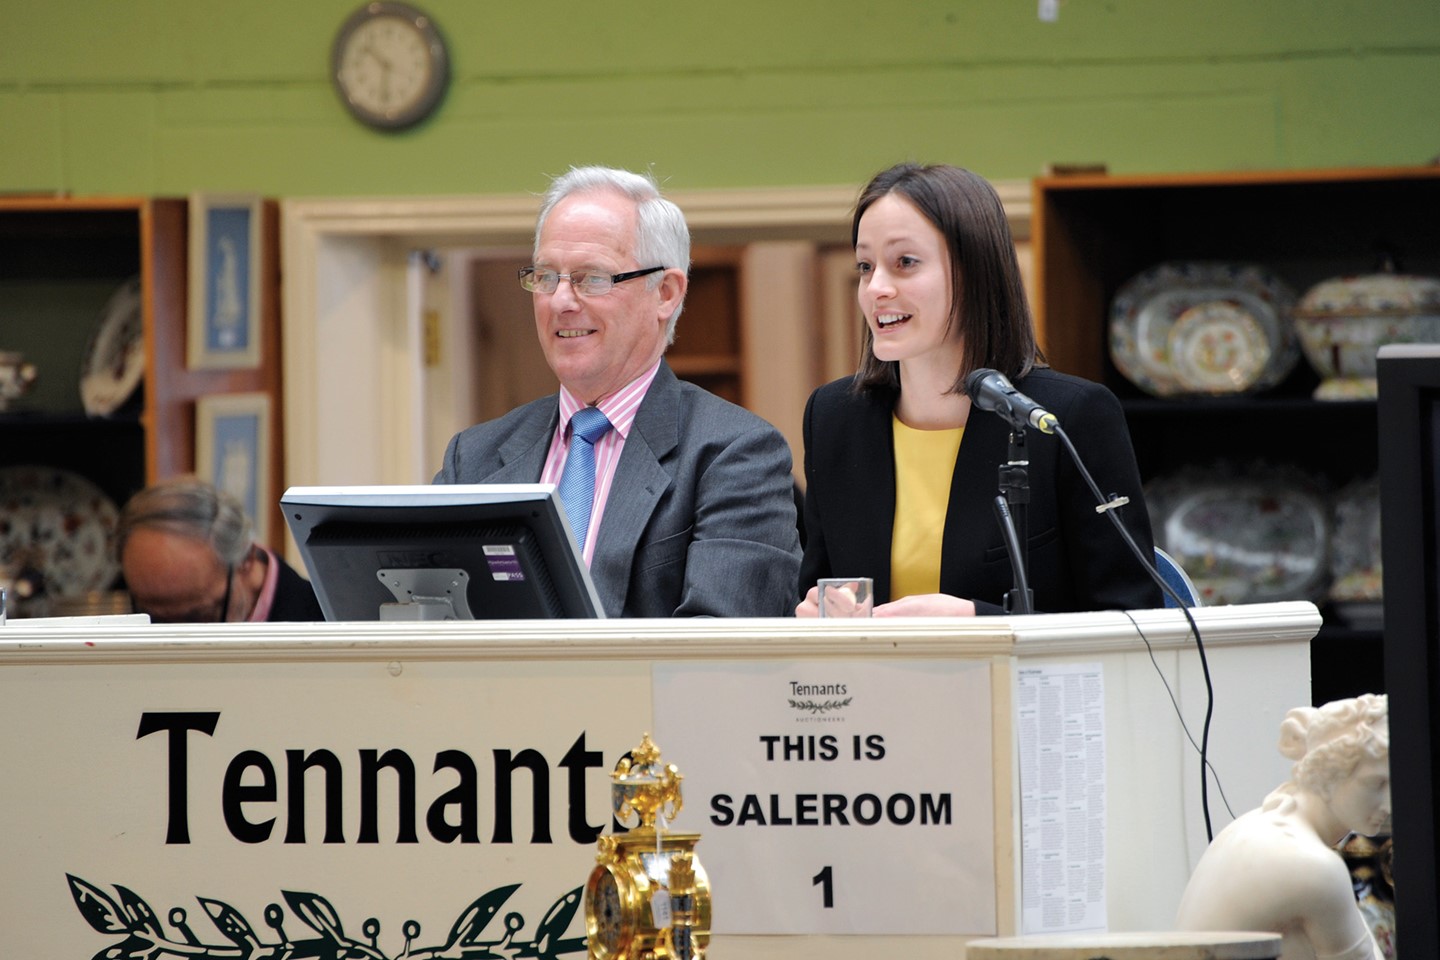 Auctioneers on the rostrum